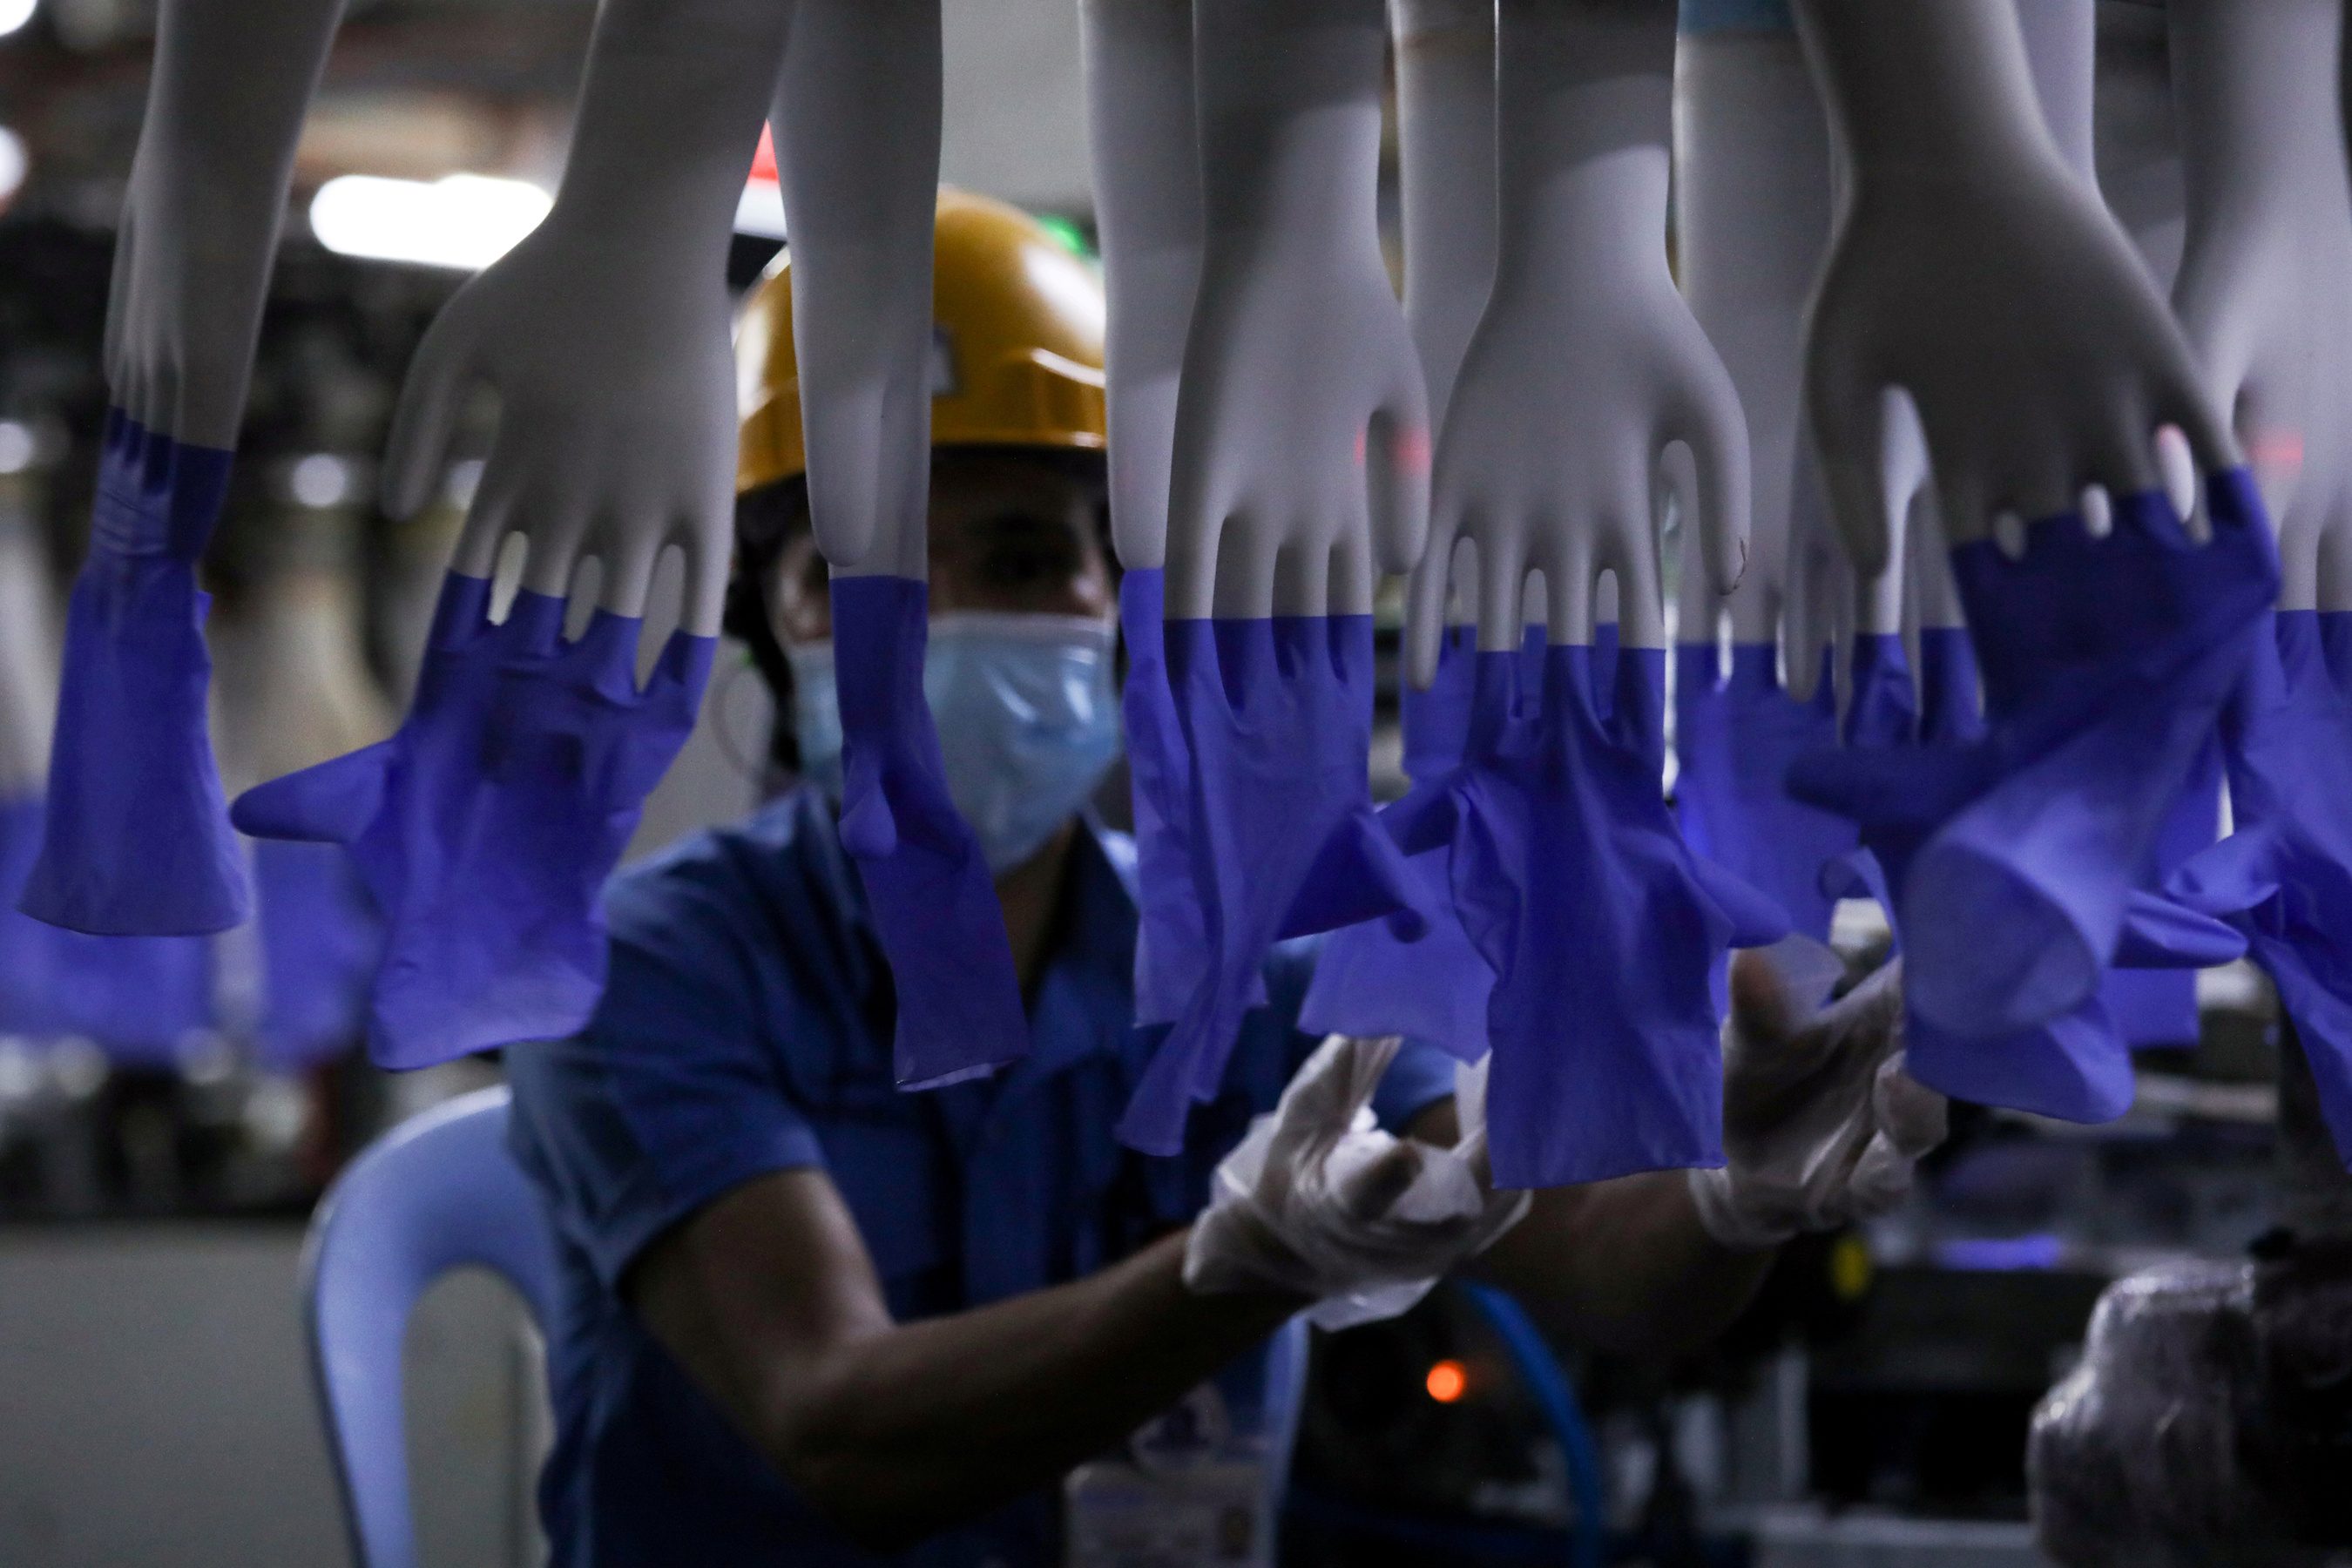 US Customs says forced labor used at Malaysia’s Top Glove